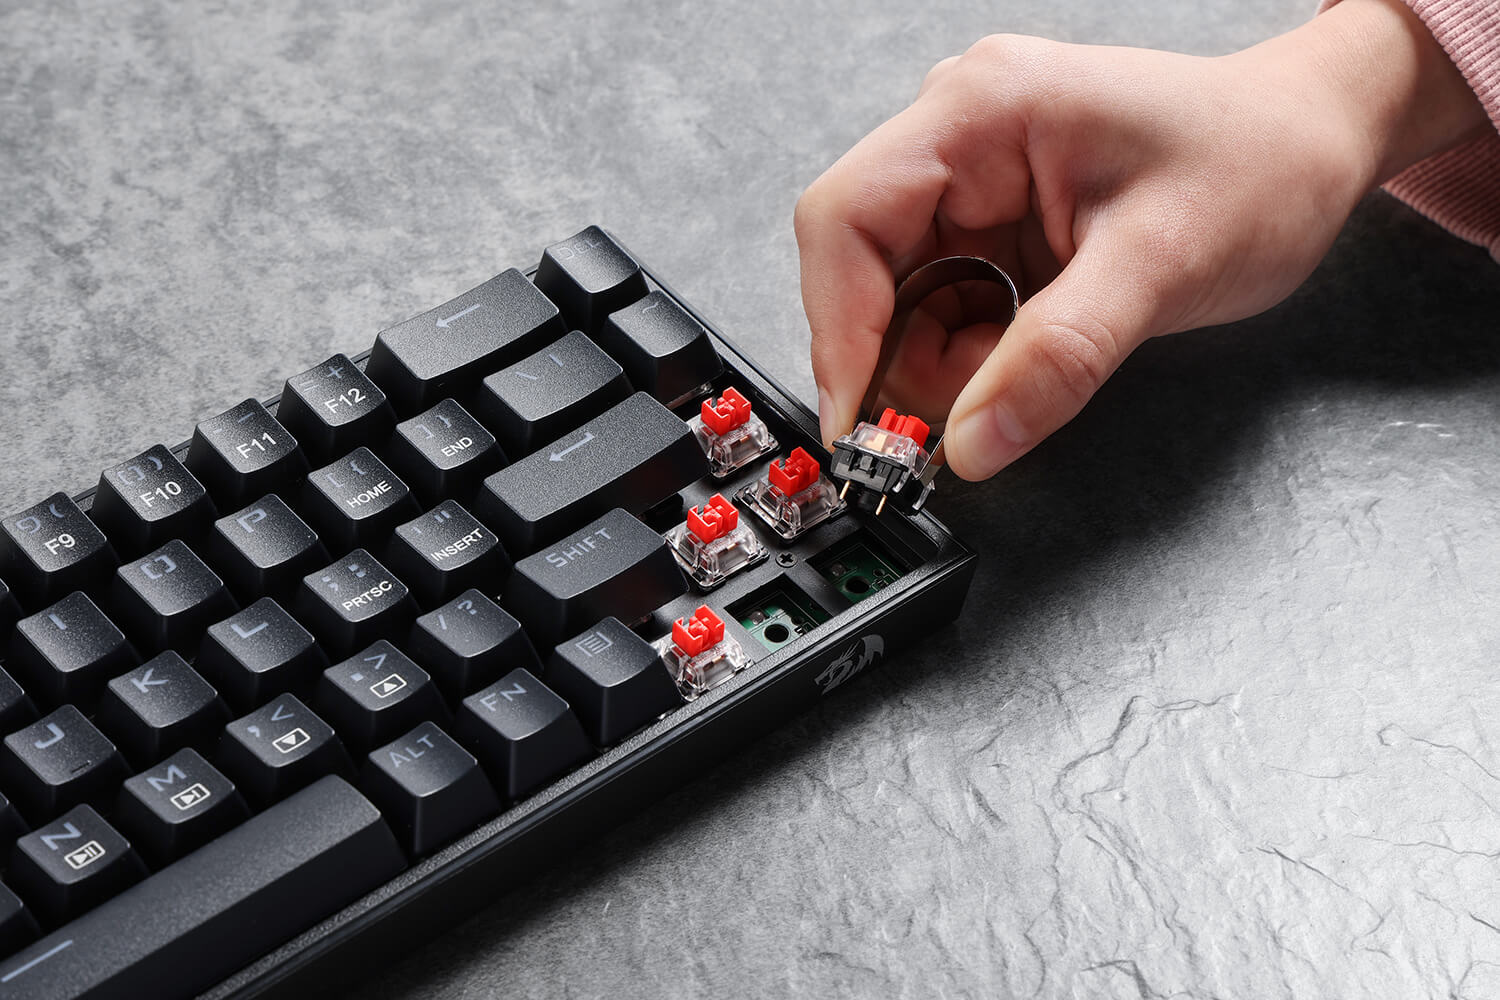 Hot-Swappable Red Switches